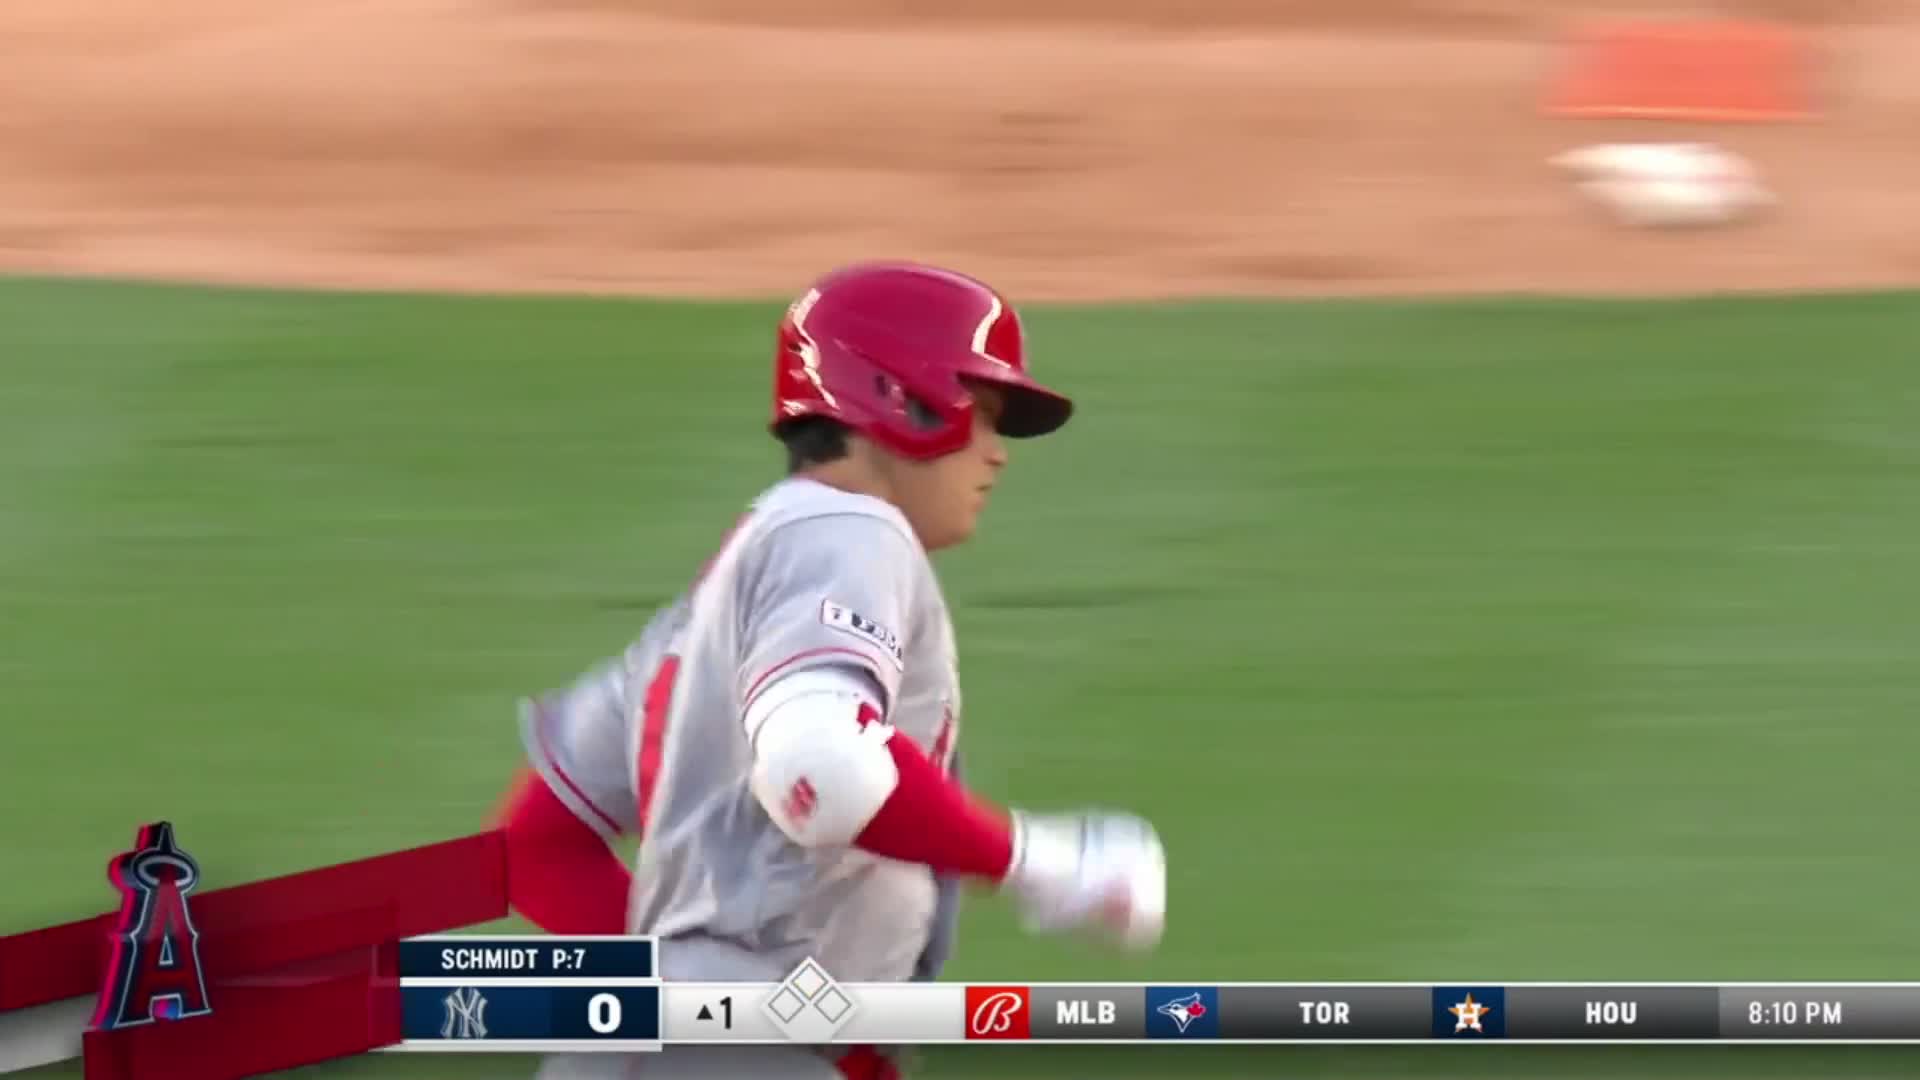 Watch: Judge robs Ohtani of home run, then hits one in Yankees